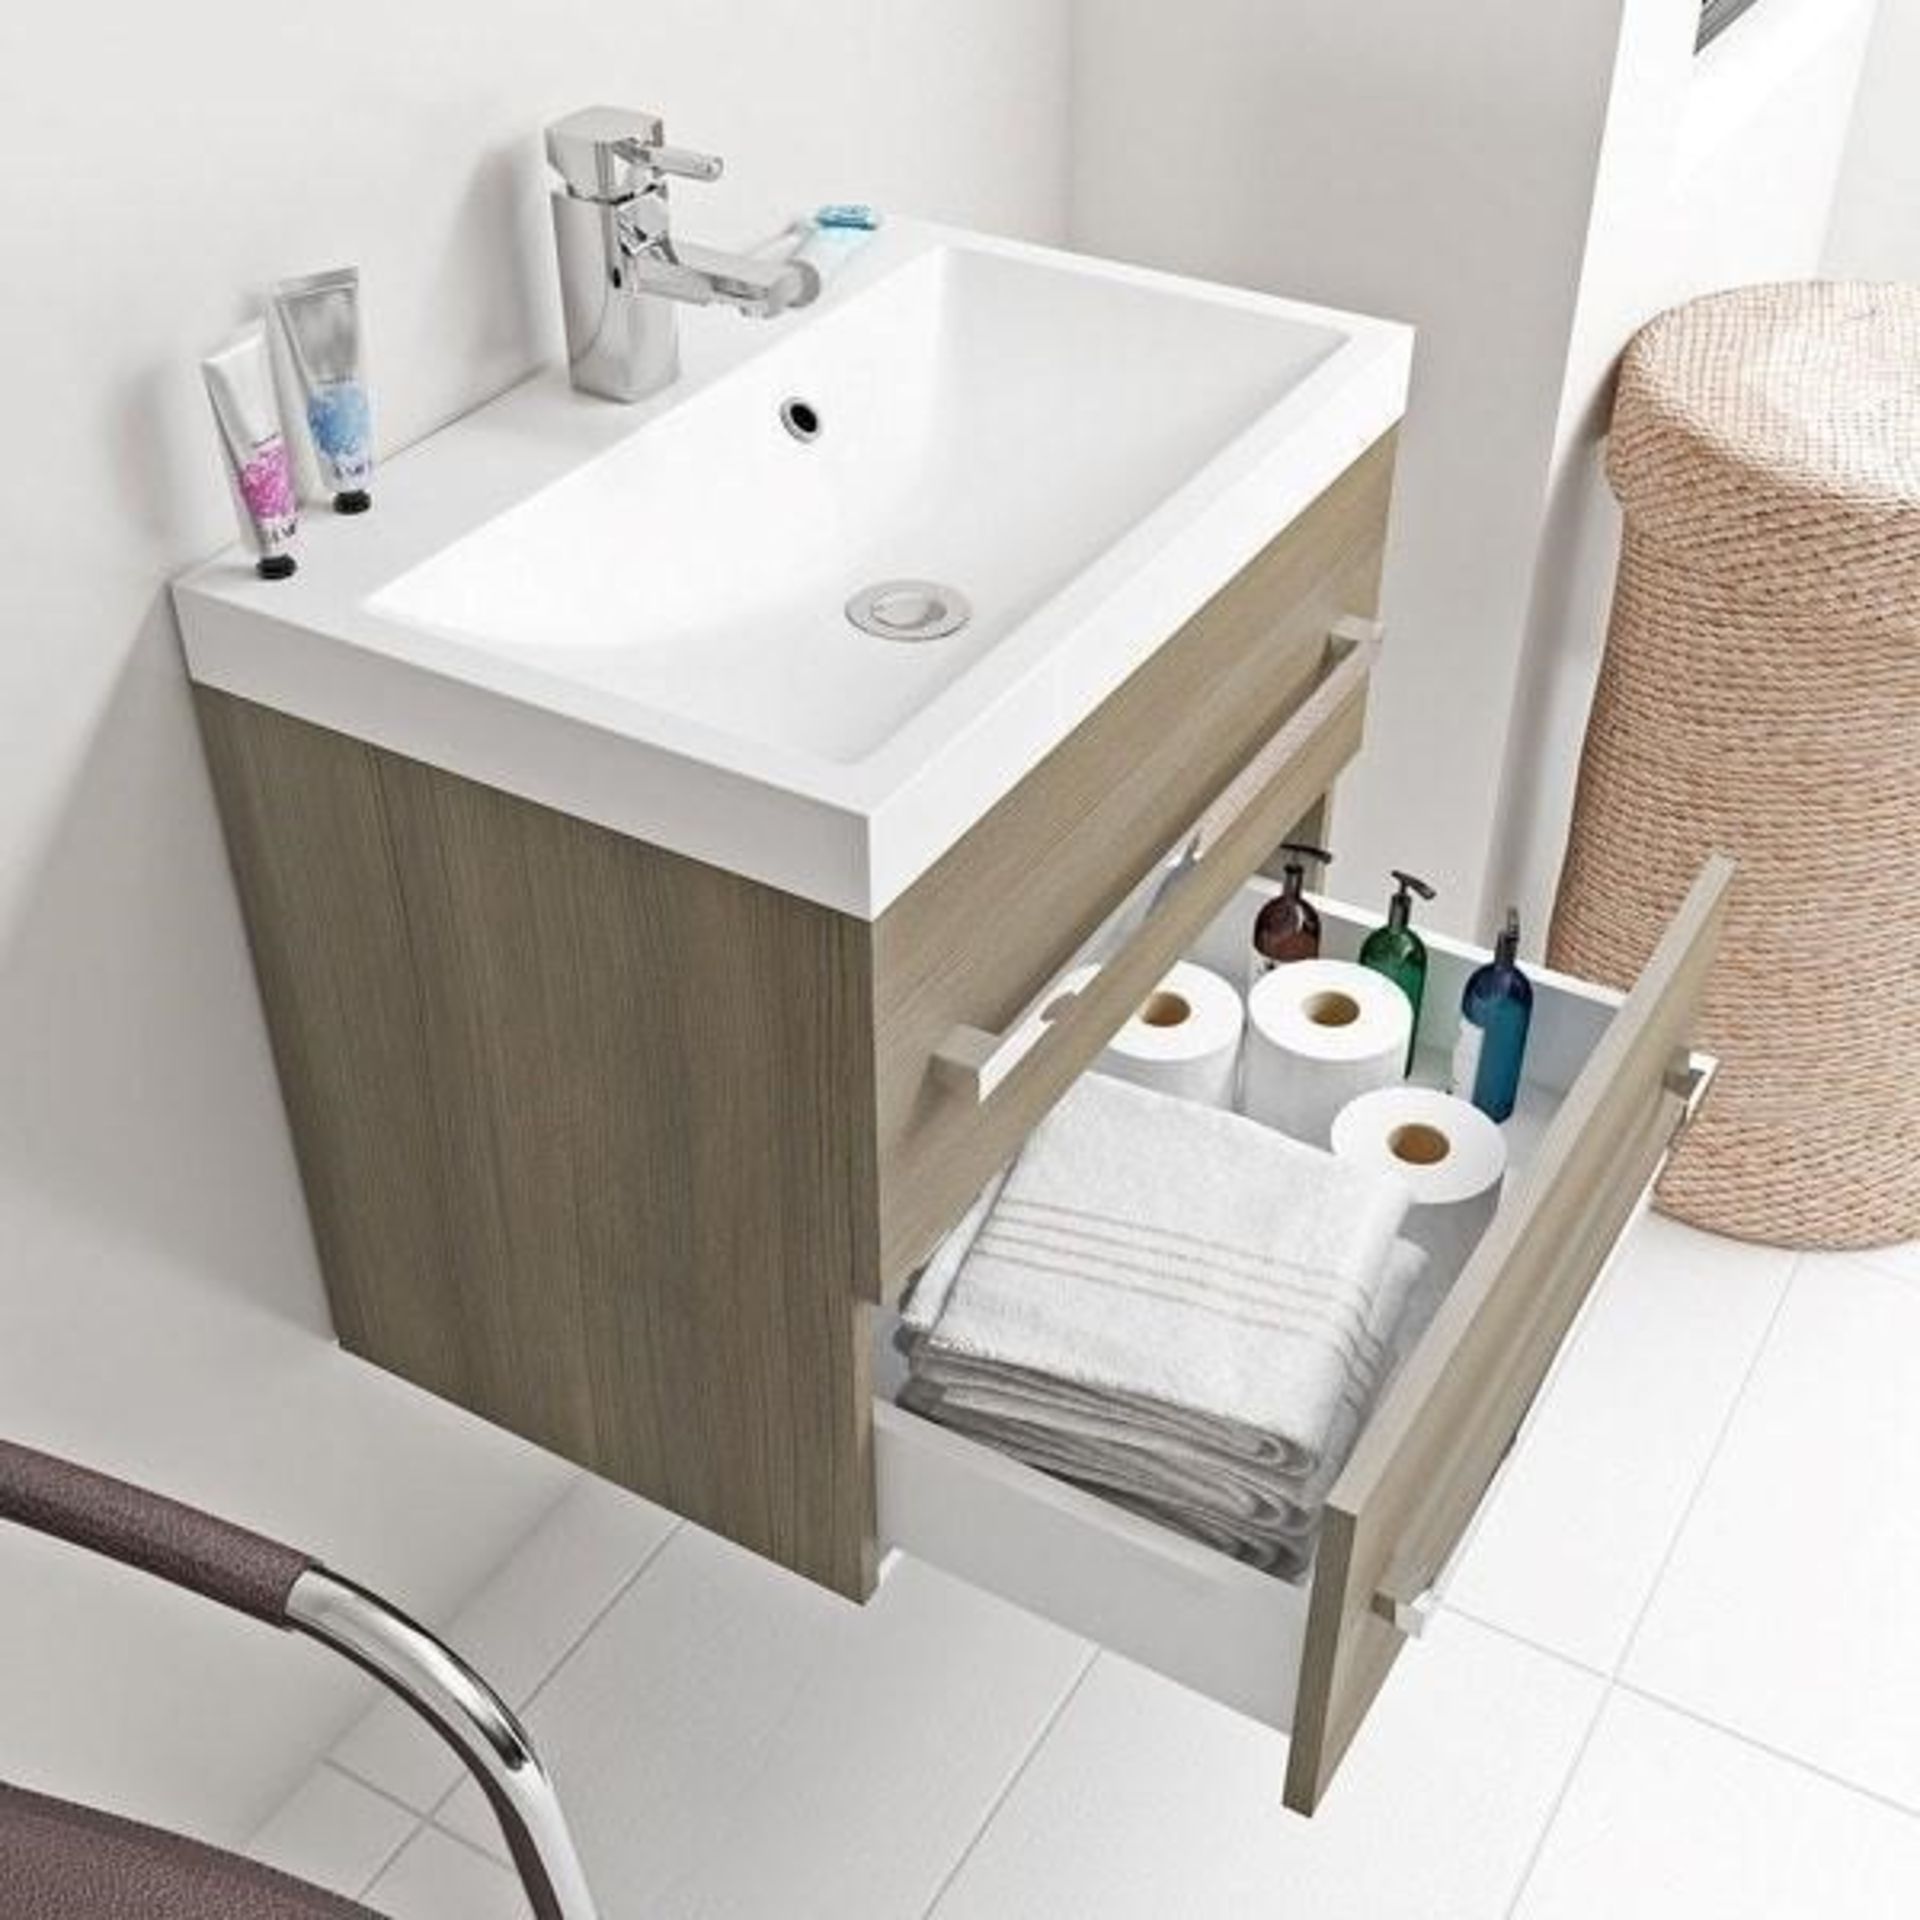 1 x Drift Walnut 600mm Wall Hung Vanity Unit With Chrome Handles - Unboxed Ex-display Item - Dimensi - Image 4 of 4